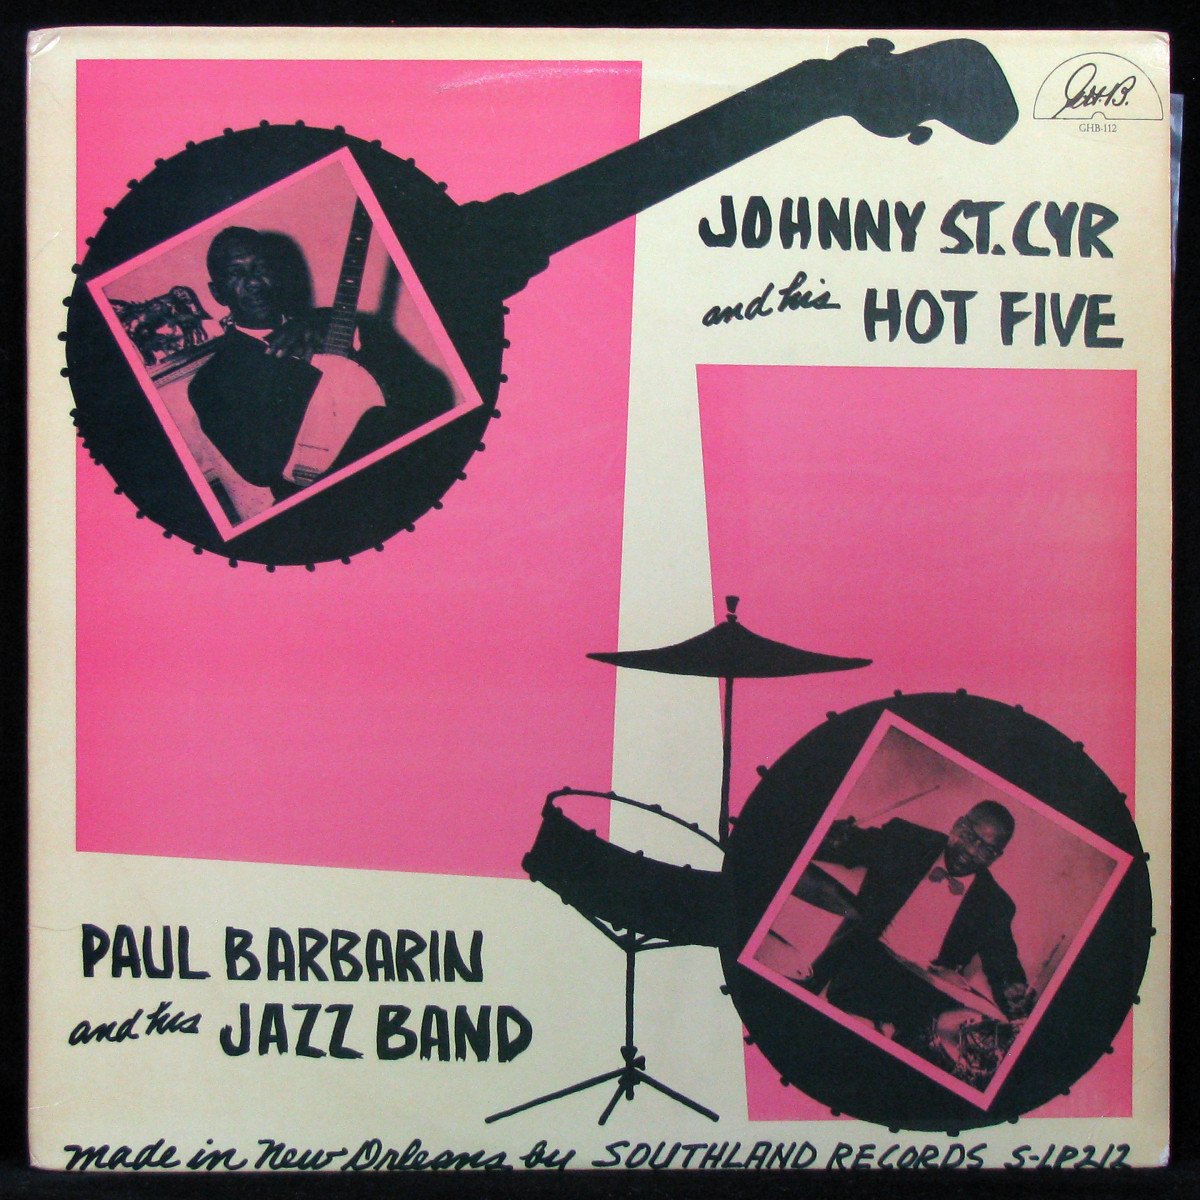 LP Johnny St. Cyr / Paul Barbarin — Johnny St. Cyr And His Hot Five / Paul Barbarin And His Jazz Band фото